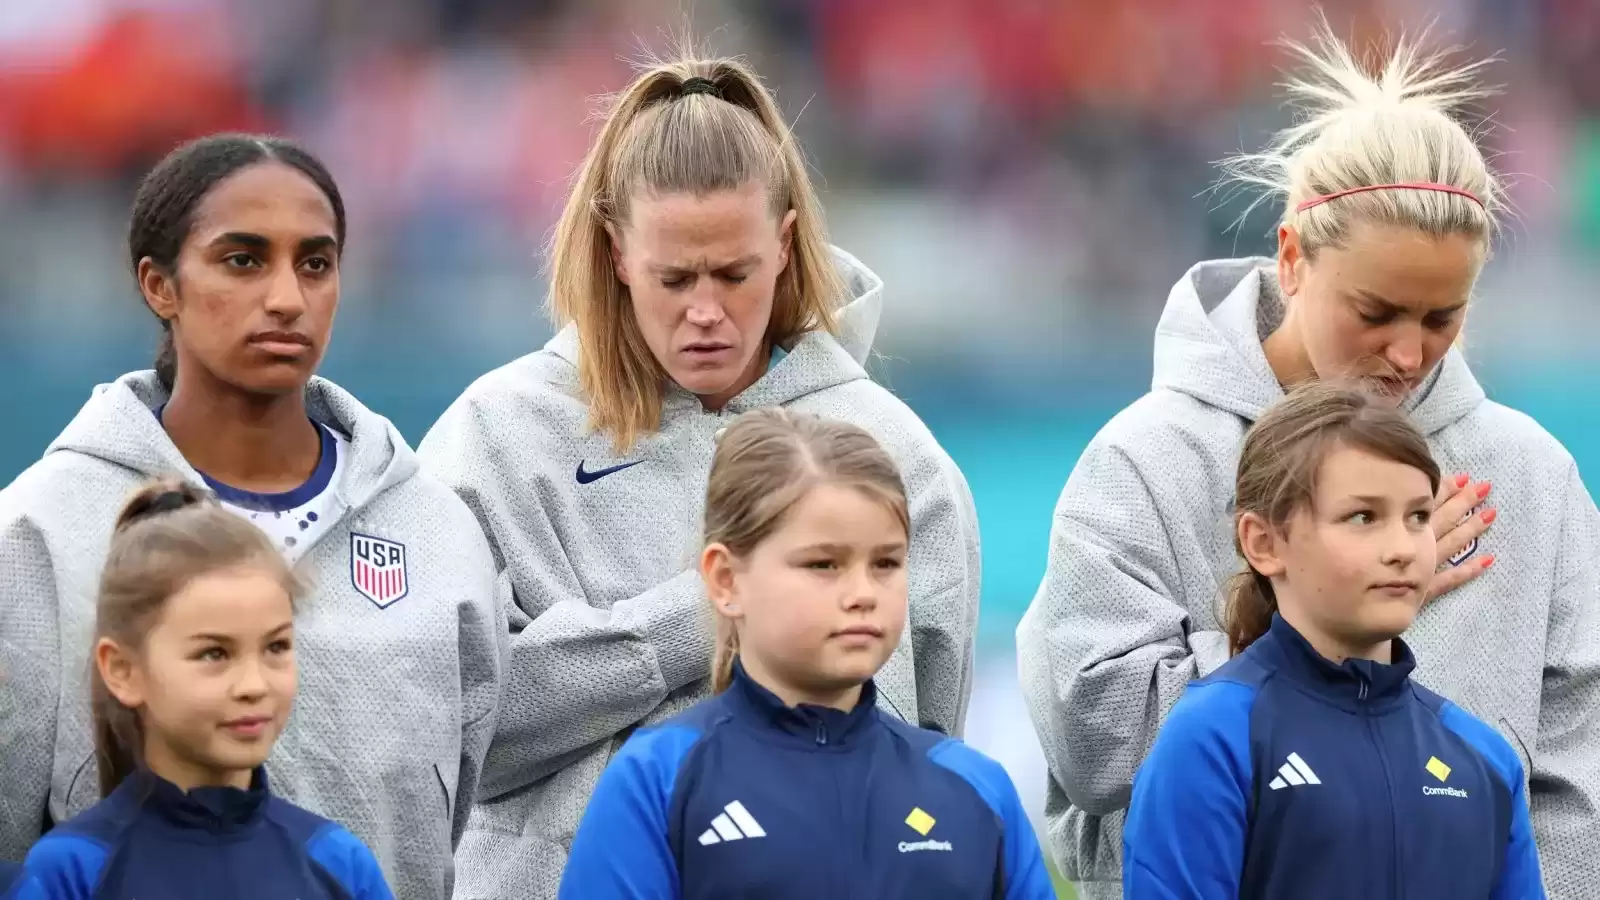 Debate Ignited by U.S. Women's Soccer Team's Silence During National Anthem